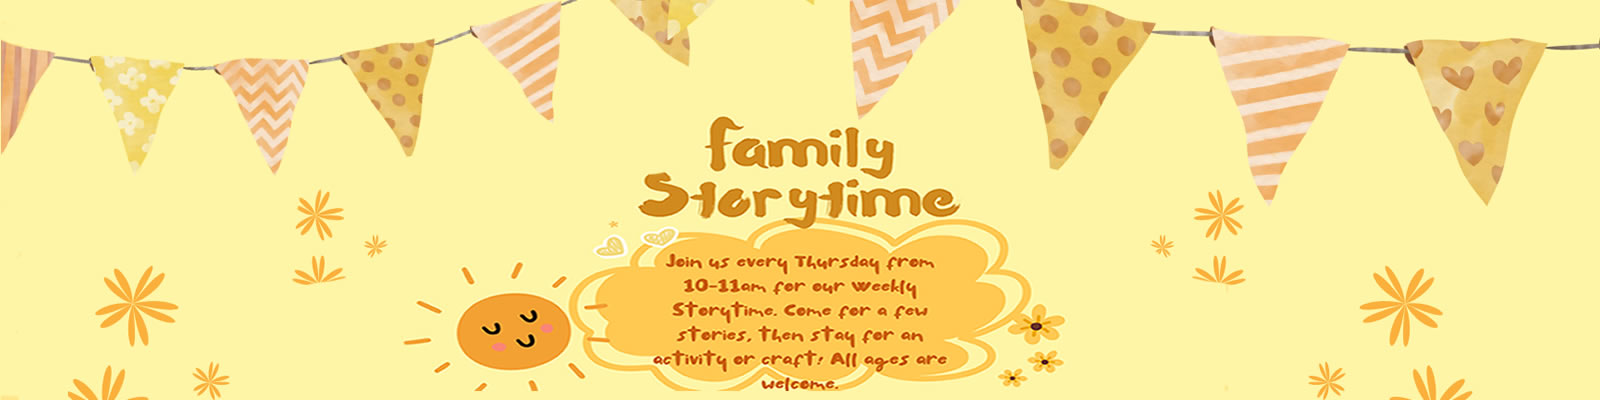 Family Storytime feature event